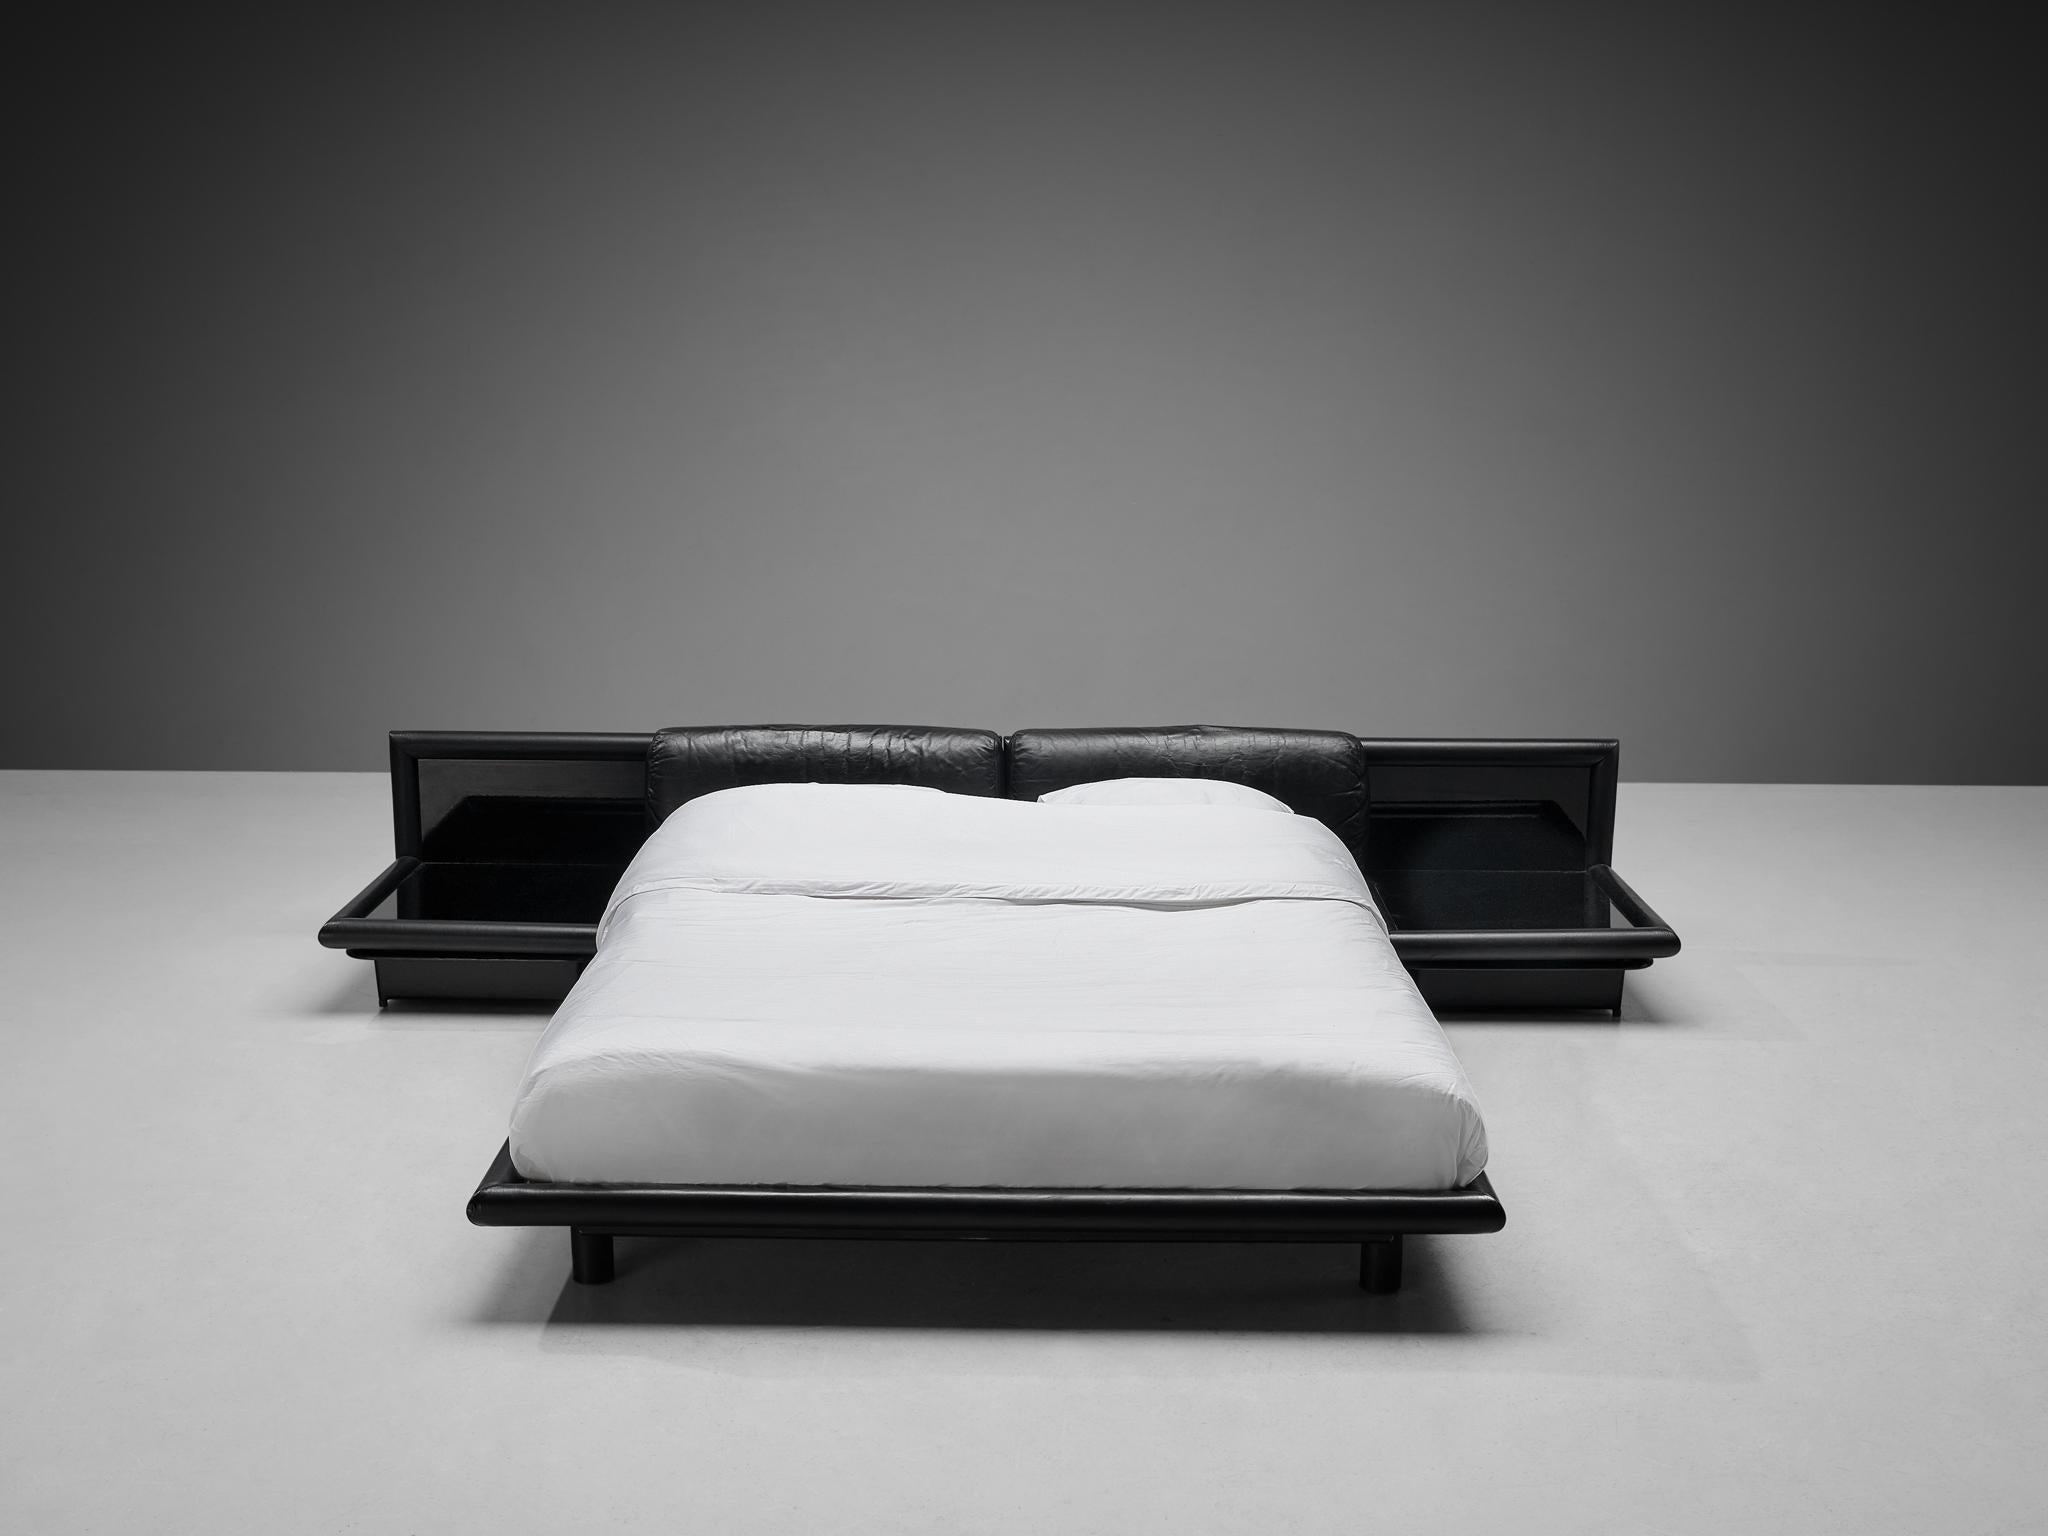 Afra & Tobia Scarpa for Molteni, bed with nightstands model ‘Morna’, leather, opaline glass, wood, plastic, Italy, designed in 1972 

This rare bed named ‘Morna’ reflects the duo’s signature design style and the transition to the modern bedroom in